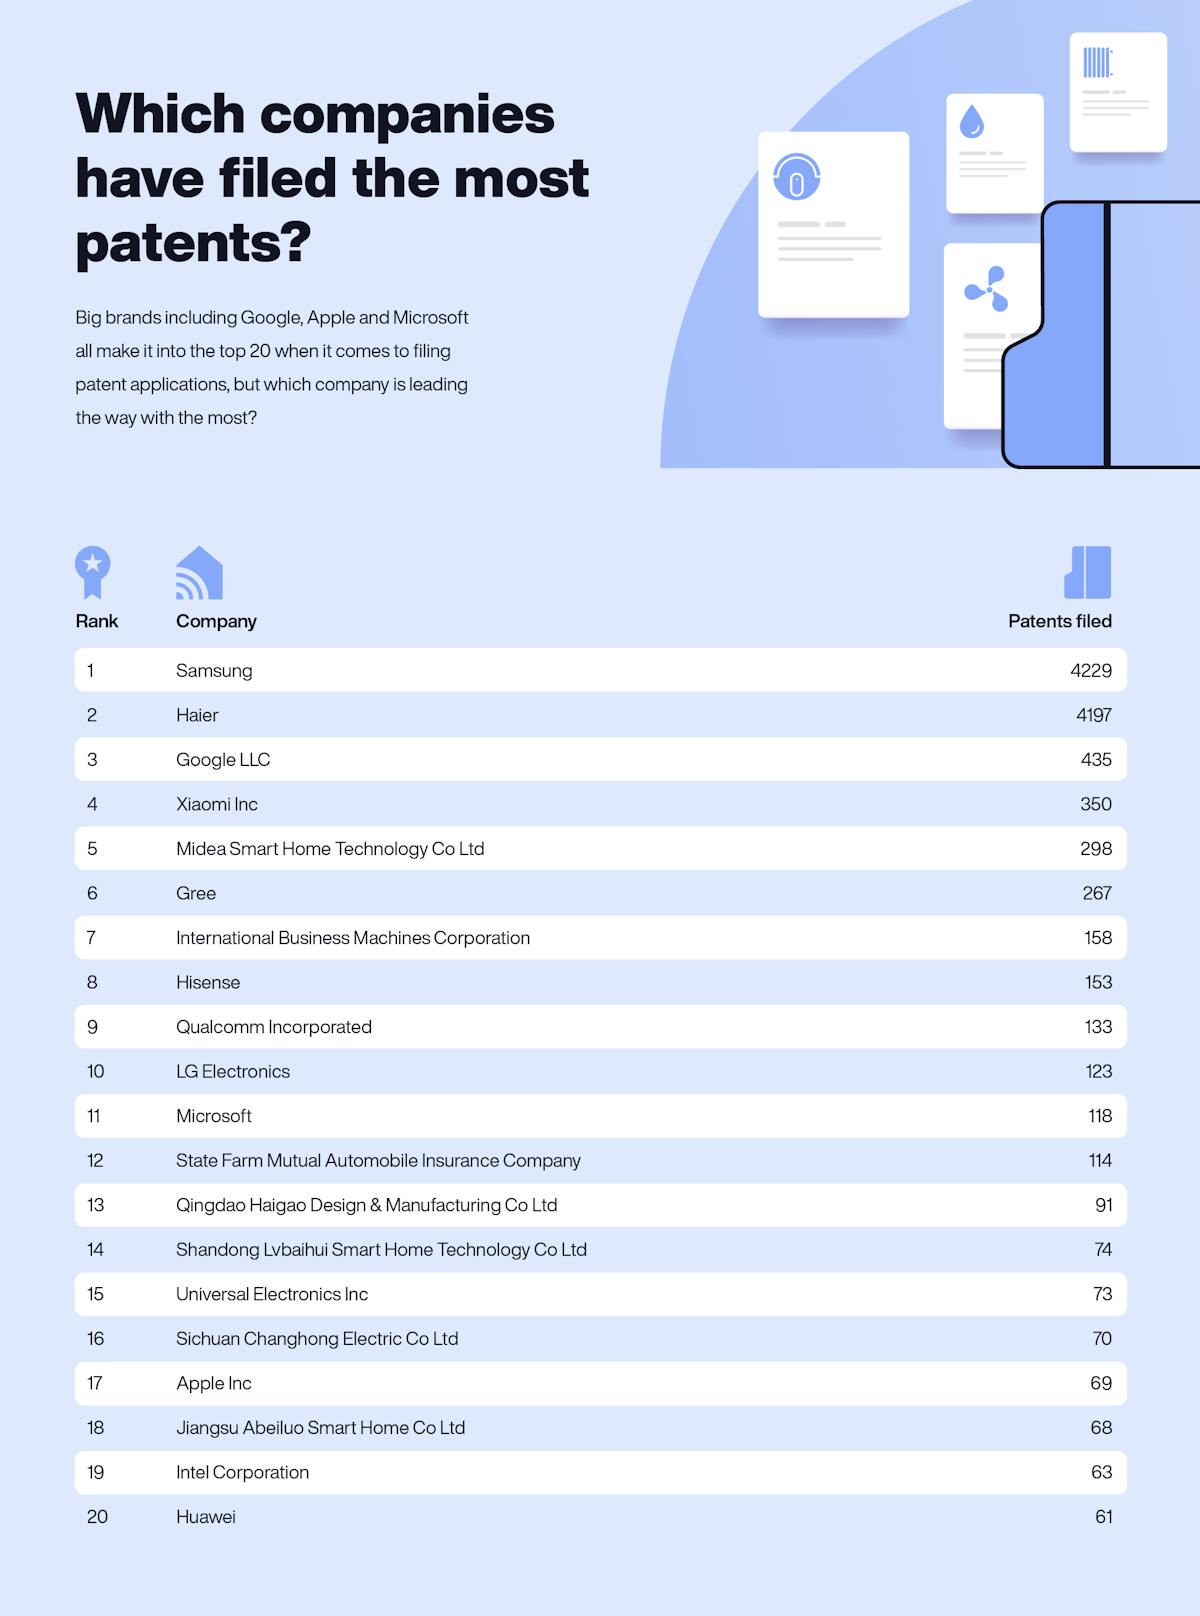 Table that shows which companies have the most filed patents.